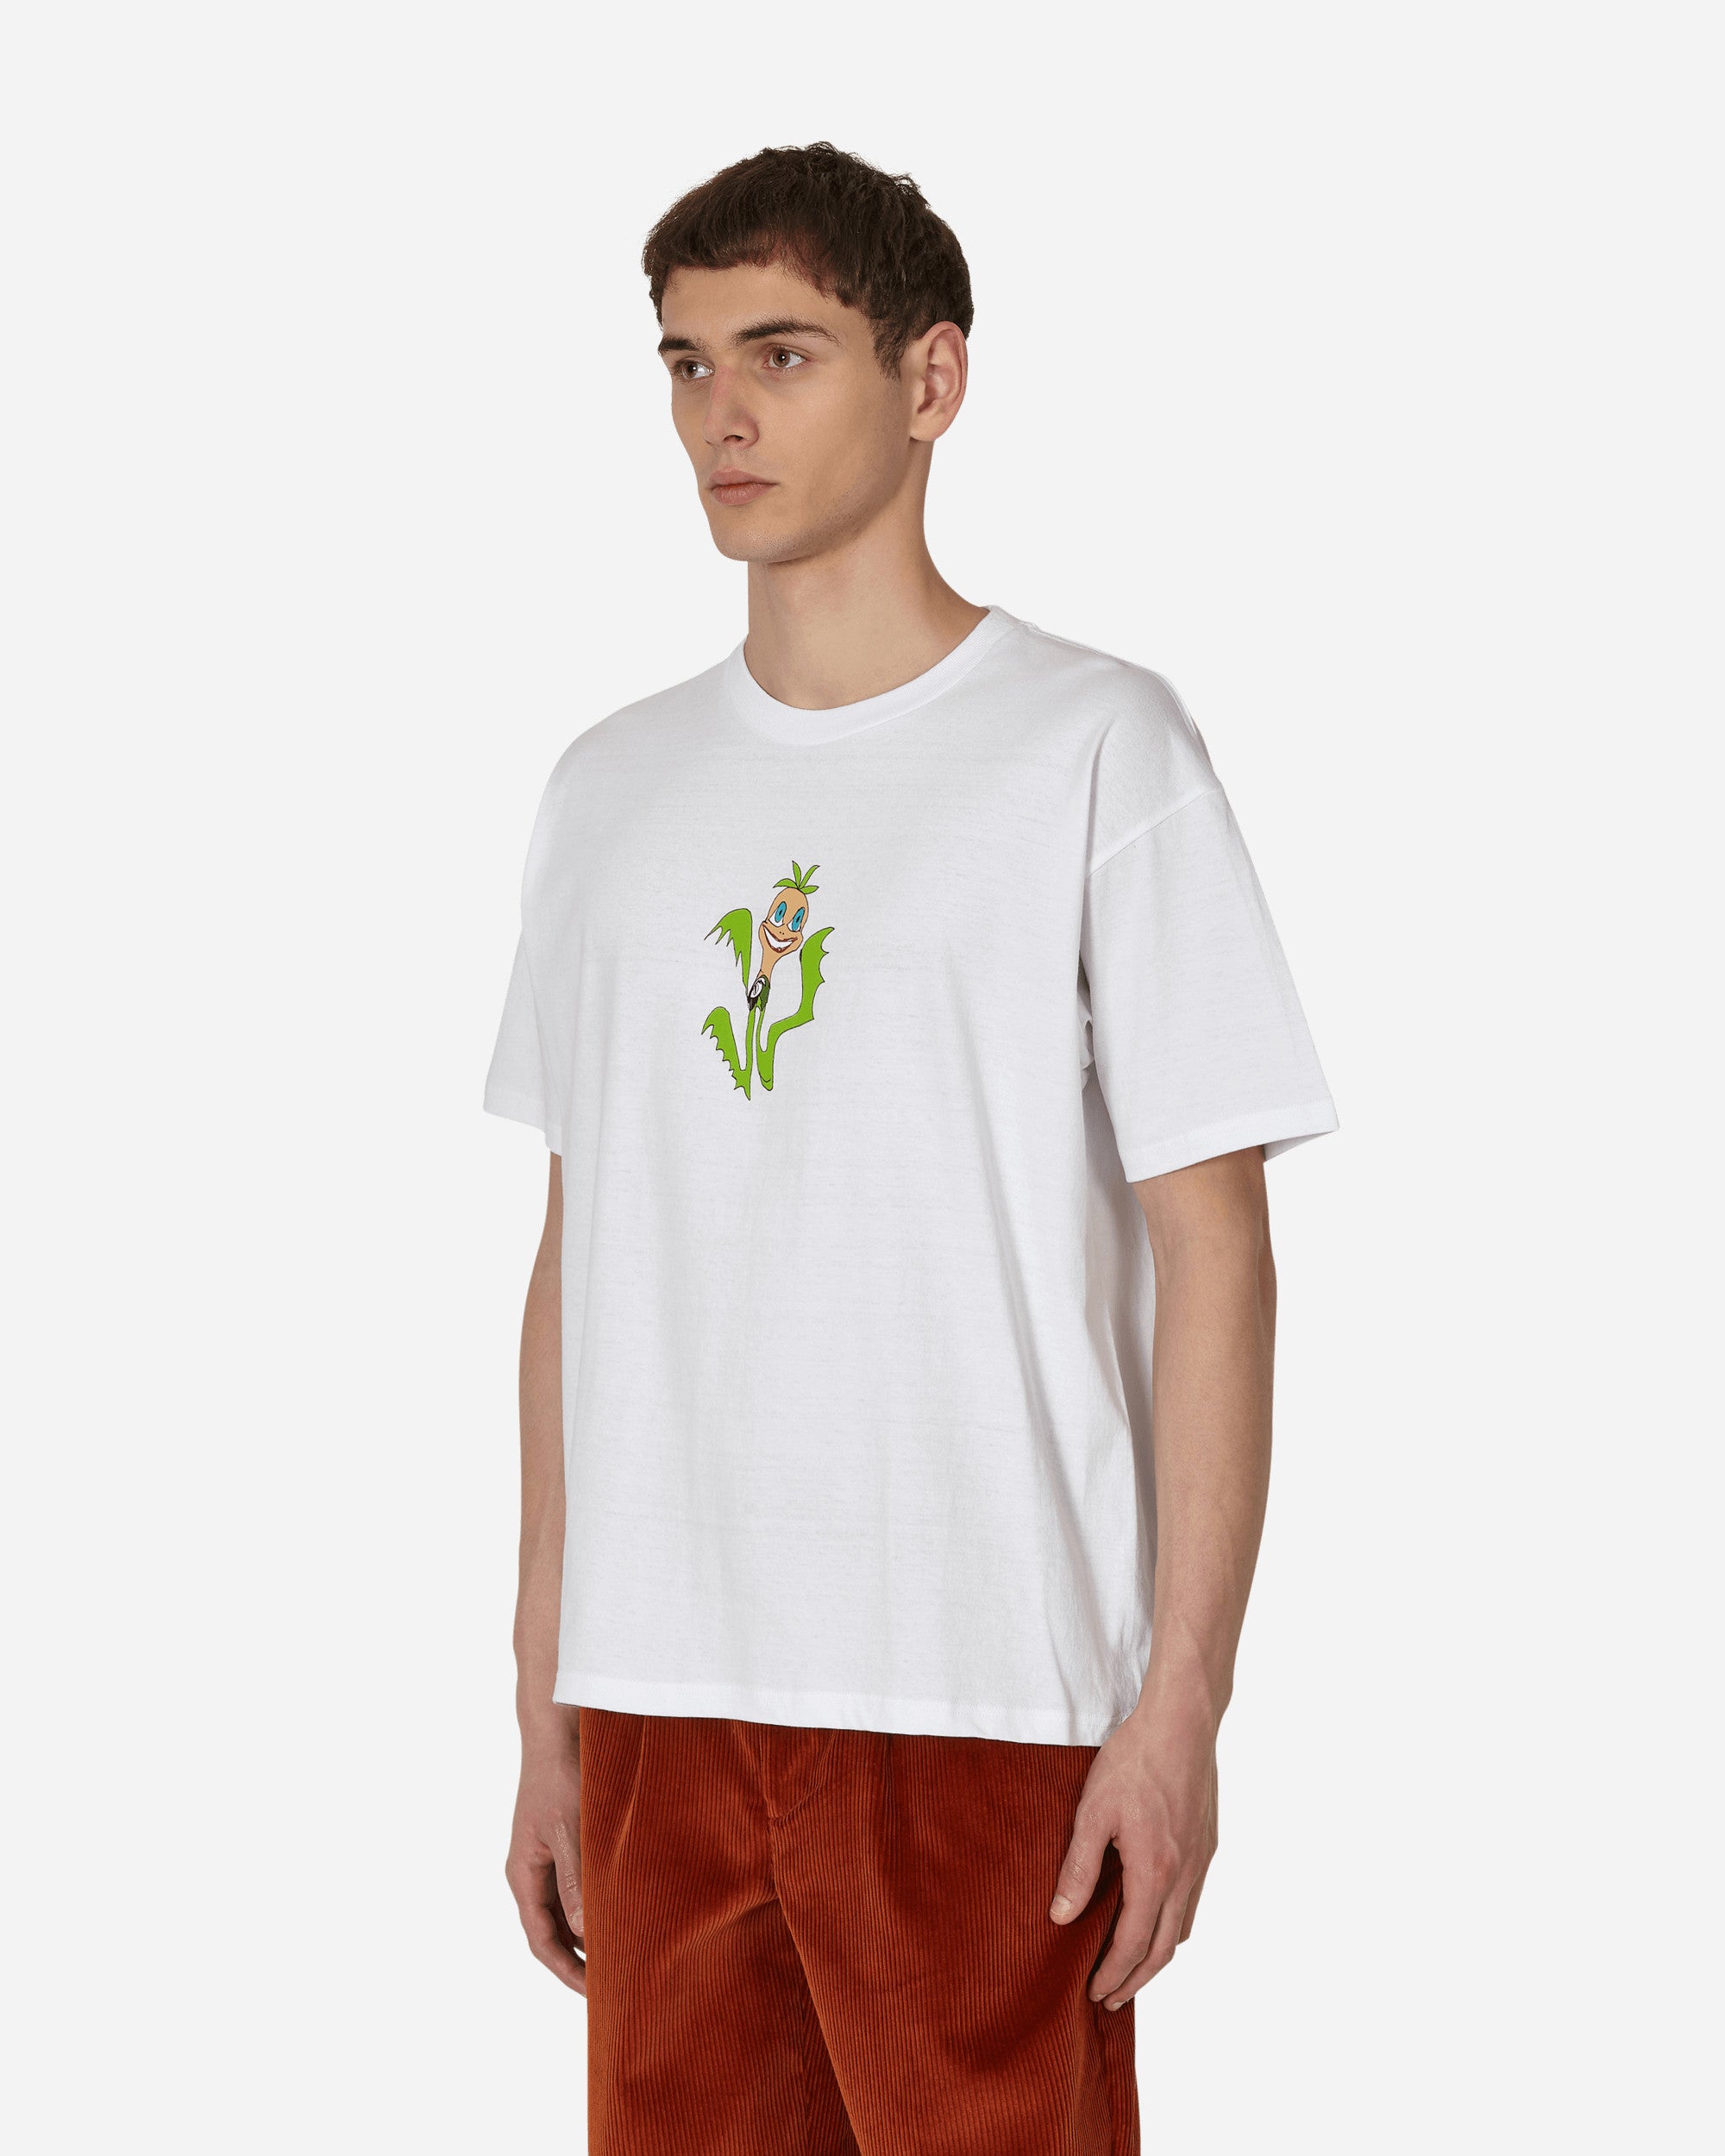 Serving The People Seeds T-Shirt White T-Shirts Shortsleeve STPF22SEEDSTEE WHITE